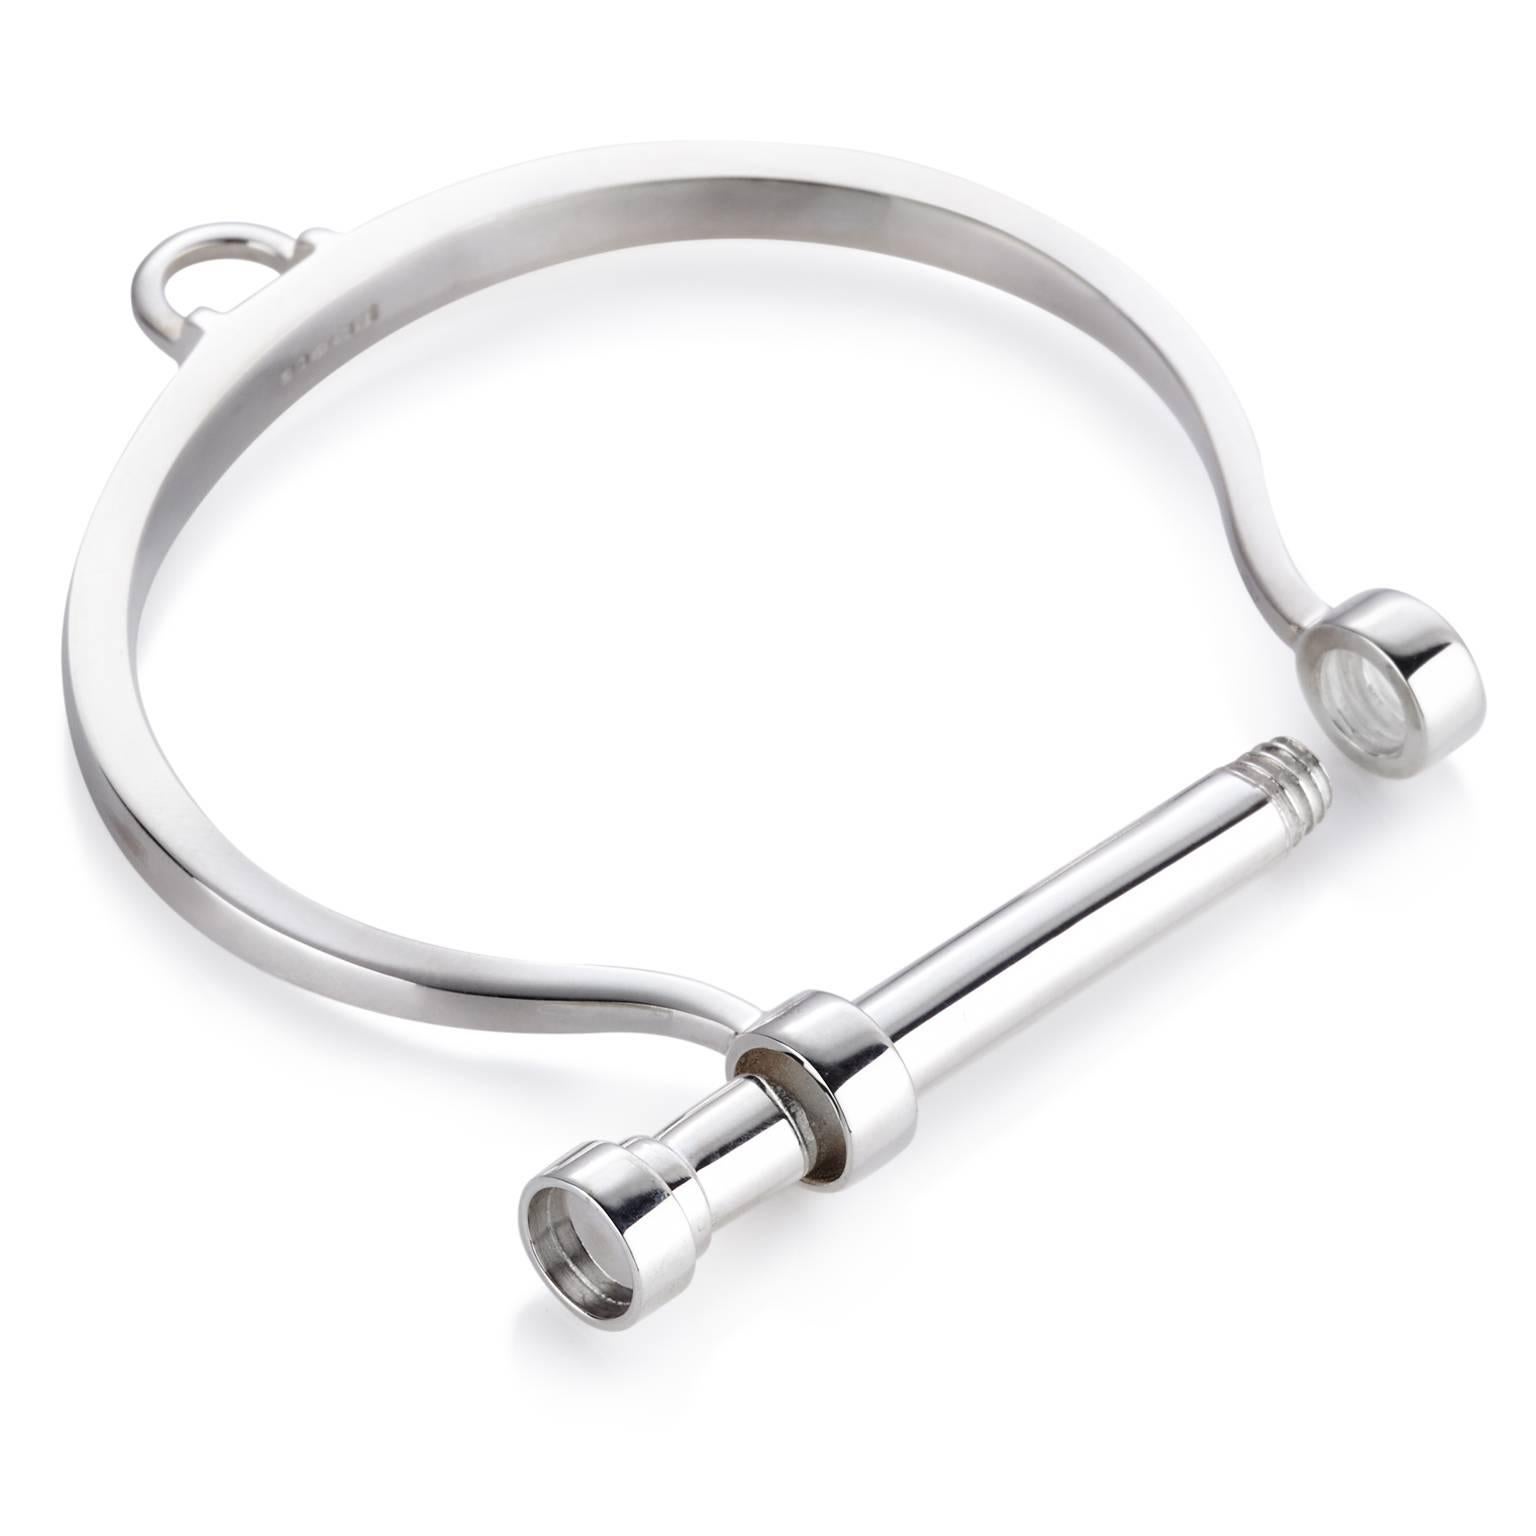 SINGLE SHACKLE BANGLE

This solid gold bangle is an excercise in subversive luxury - an area we revel in. Unscrewing across the top, as a shackle would, the bangle is a nod to restraint, with subtlety and sculptural elegance.  Also available in